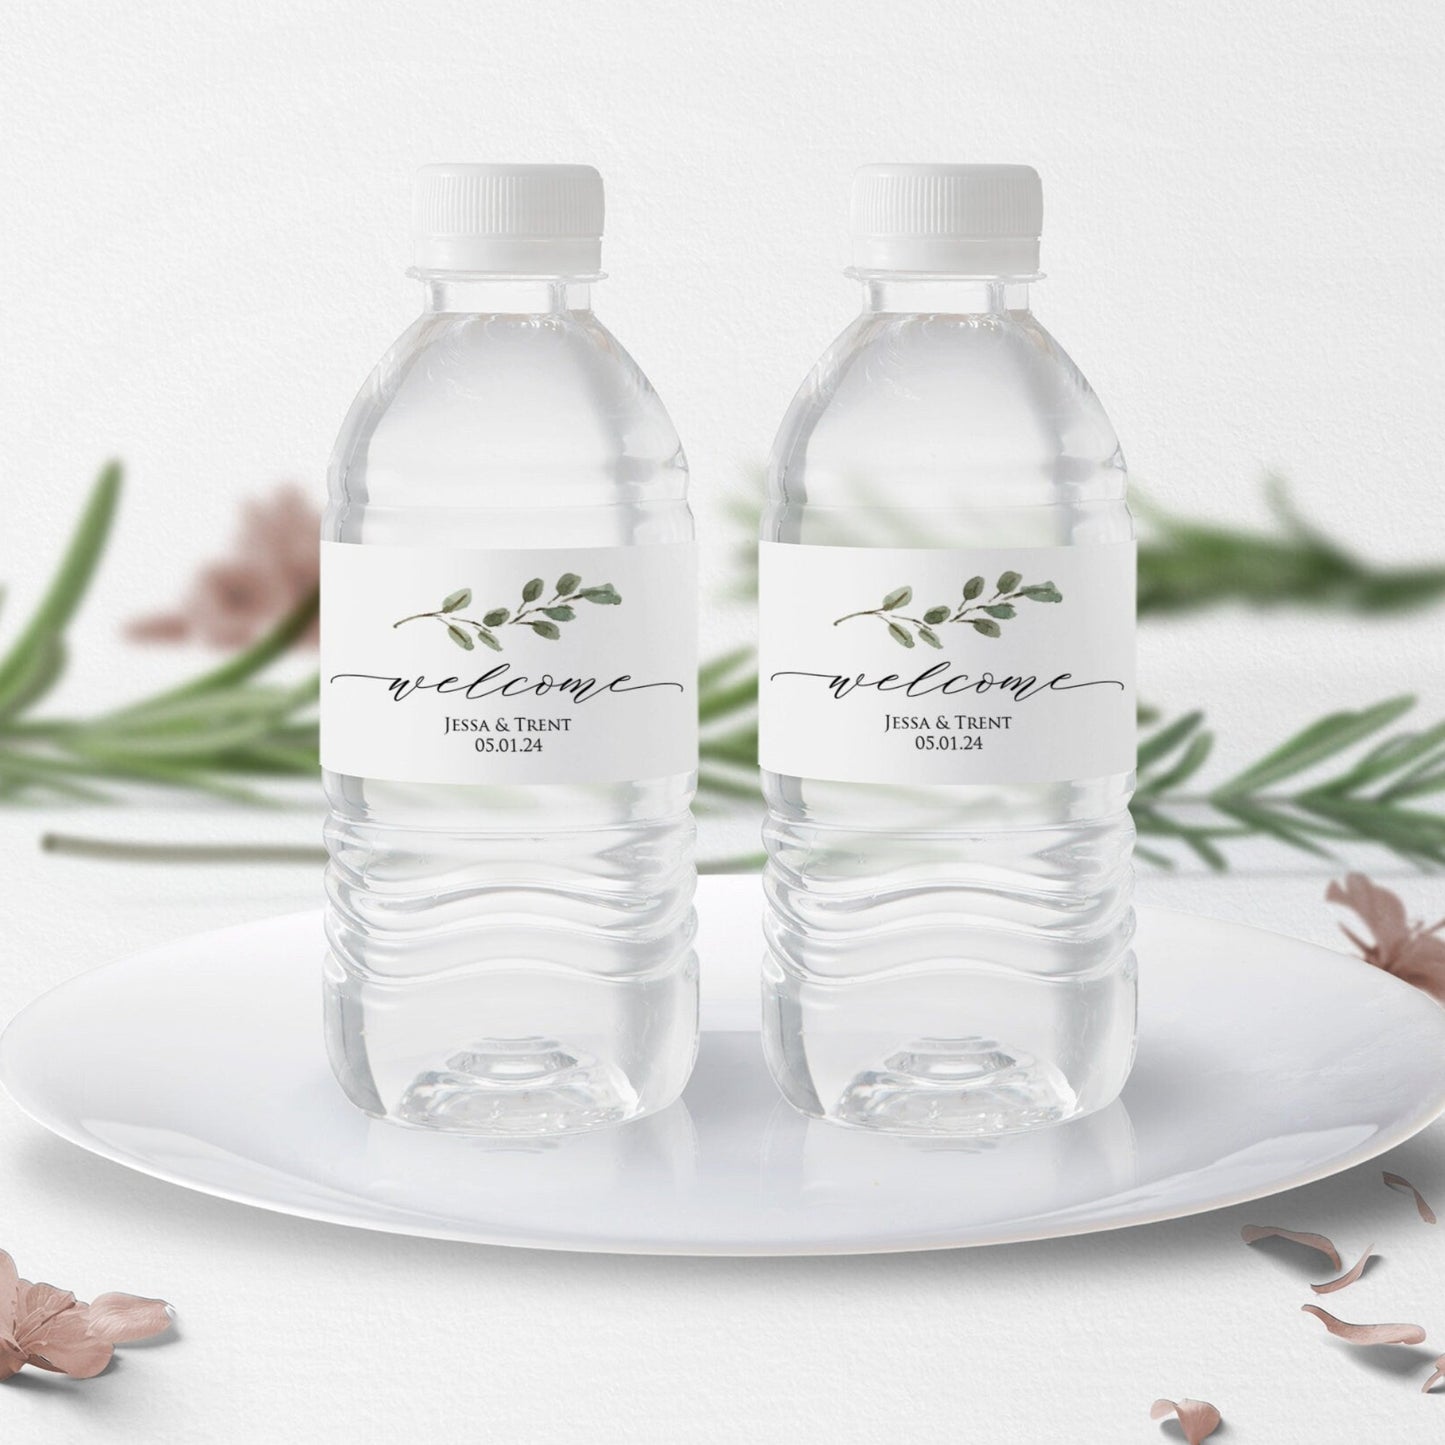 Water Bottle Labels - Welcome Wedding Labels Eucalyptus Greenery Welcome Labels Waterbottle Labels Custom Wedding Welcome Bag Stickers